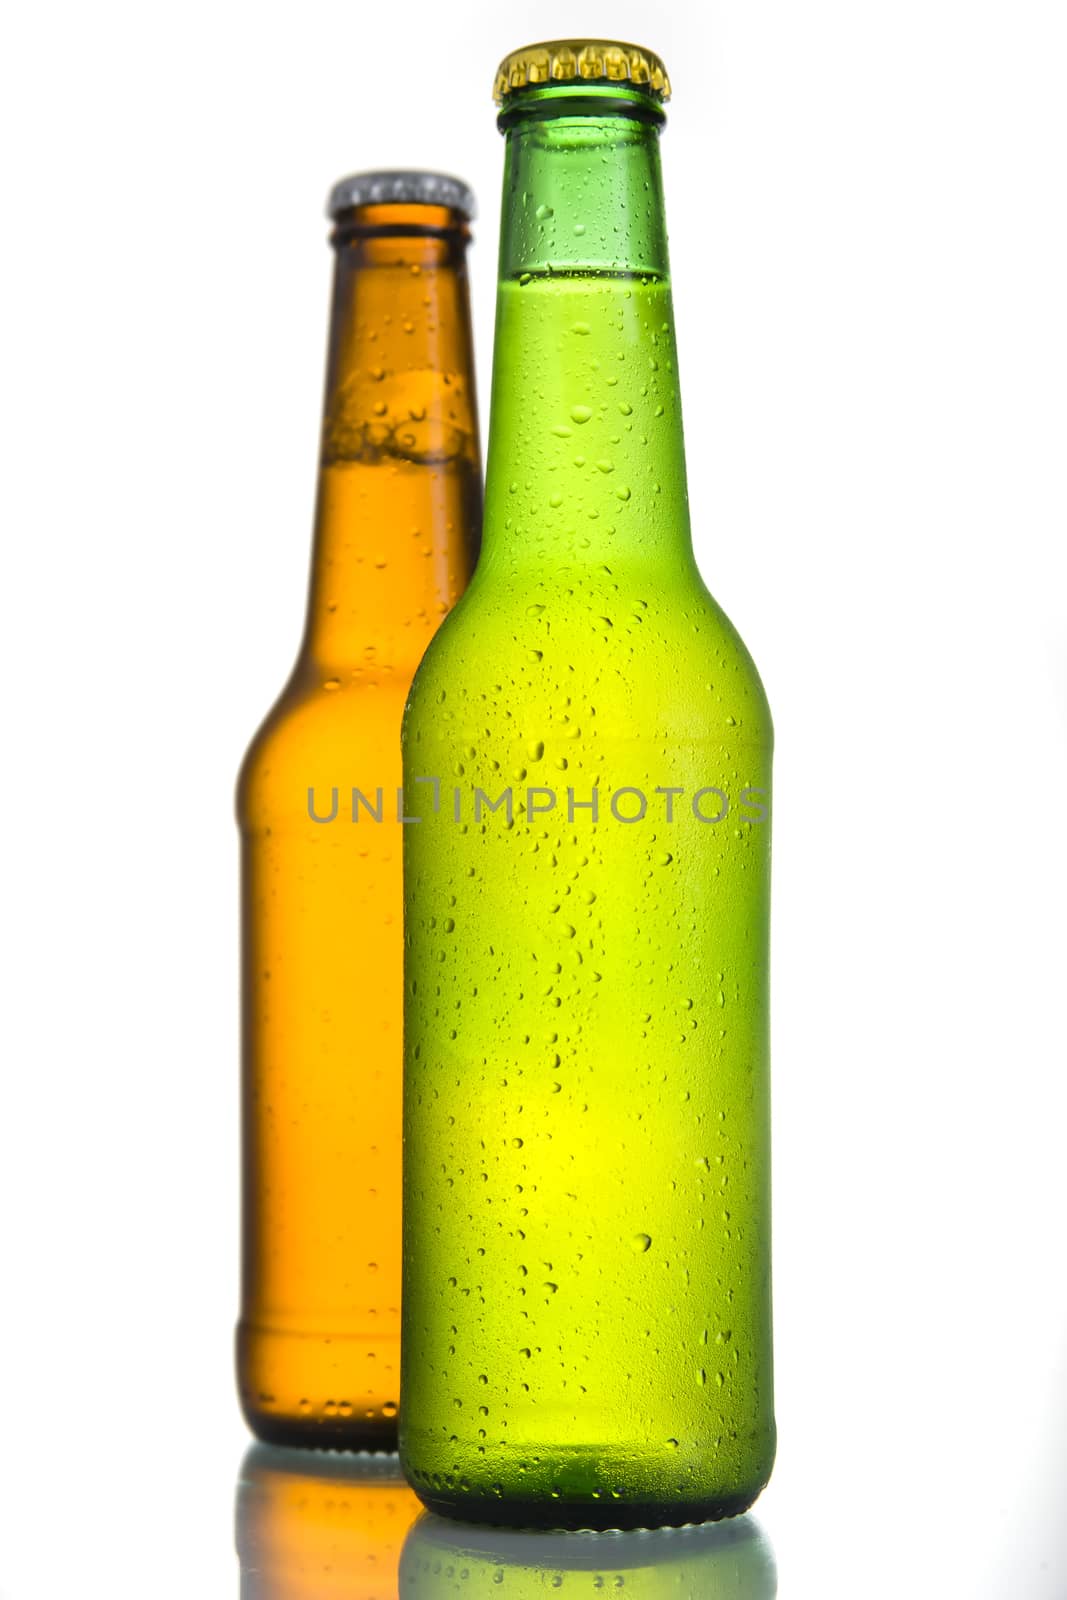 2 Cold Frosted Beer Bottles on White Background by ocusfocus